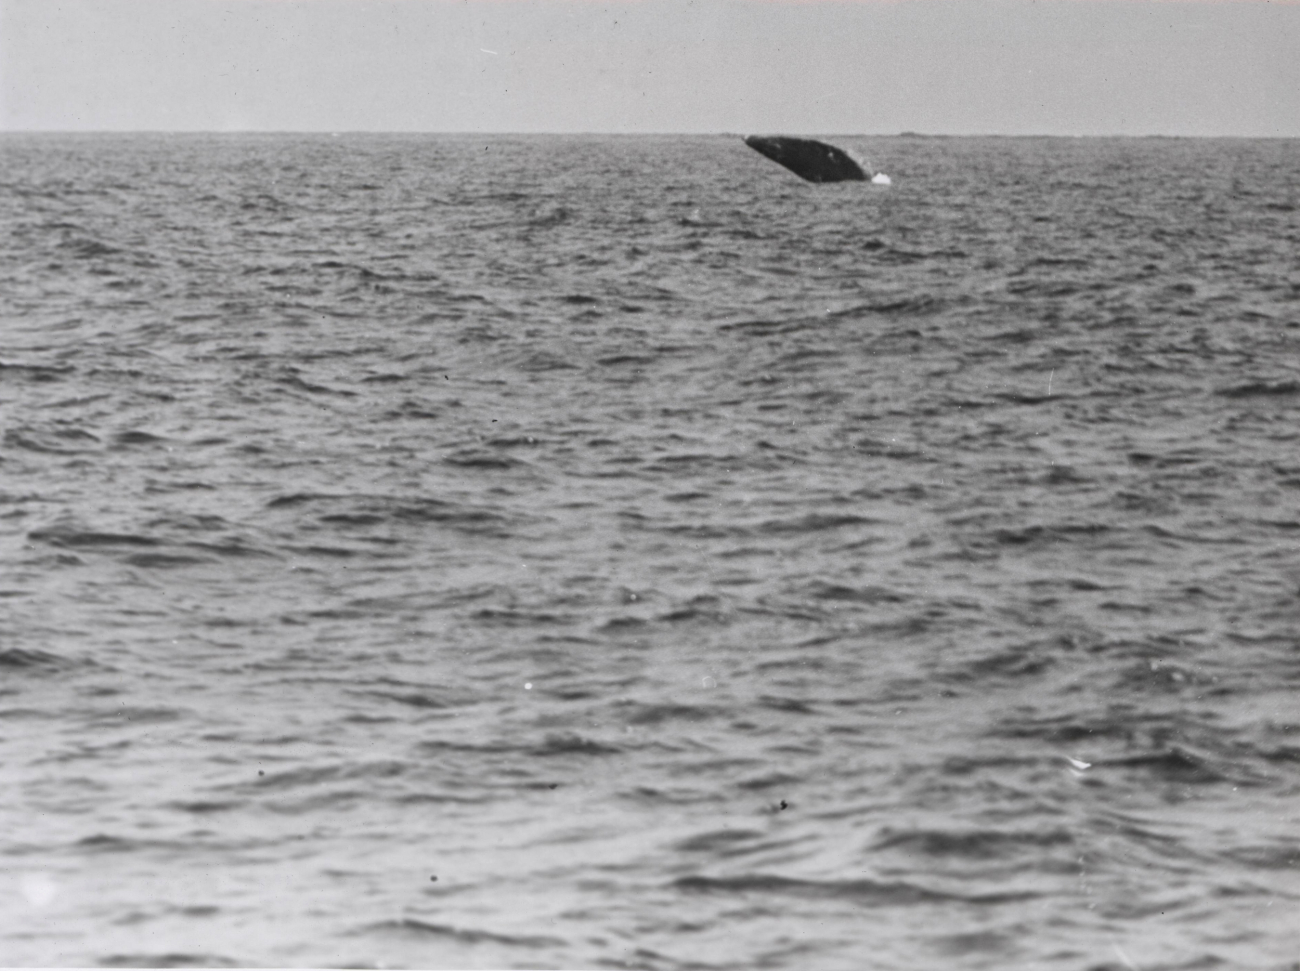 Gray whale falling back after a high breach